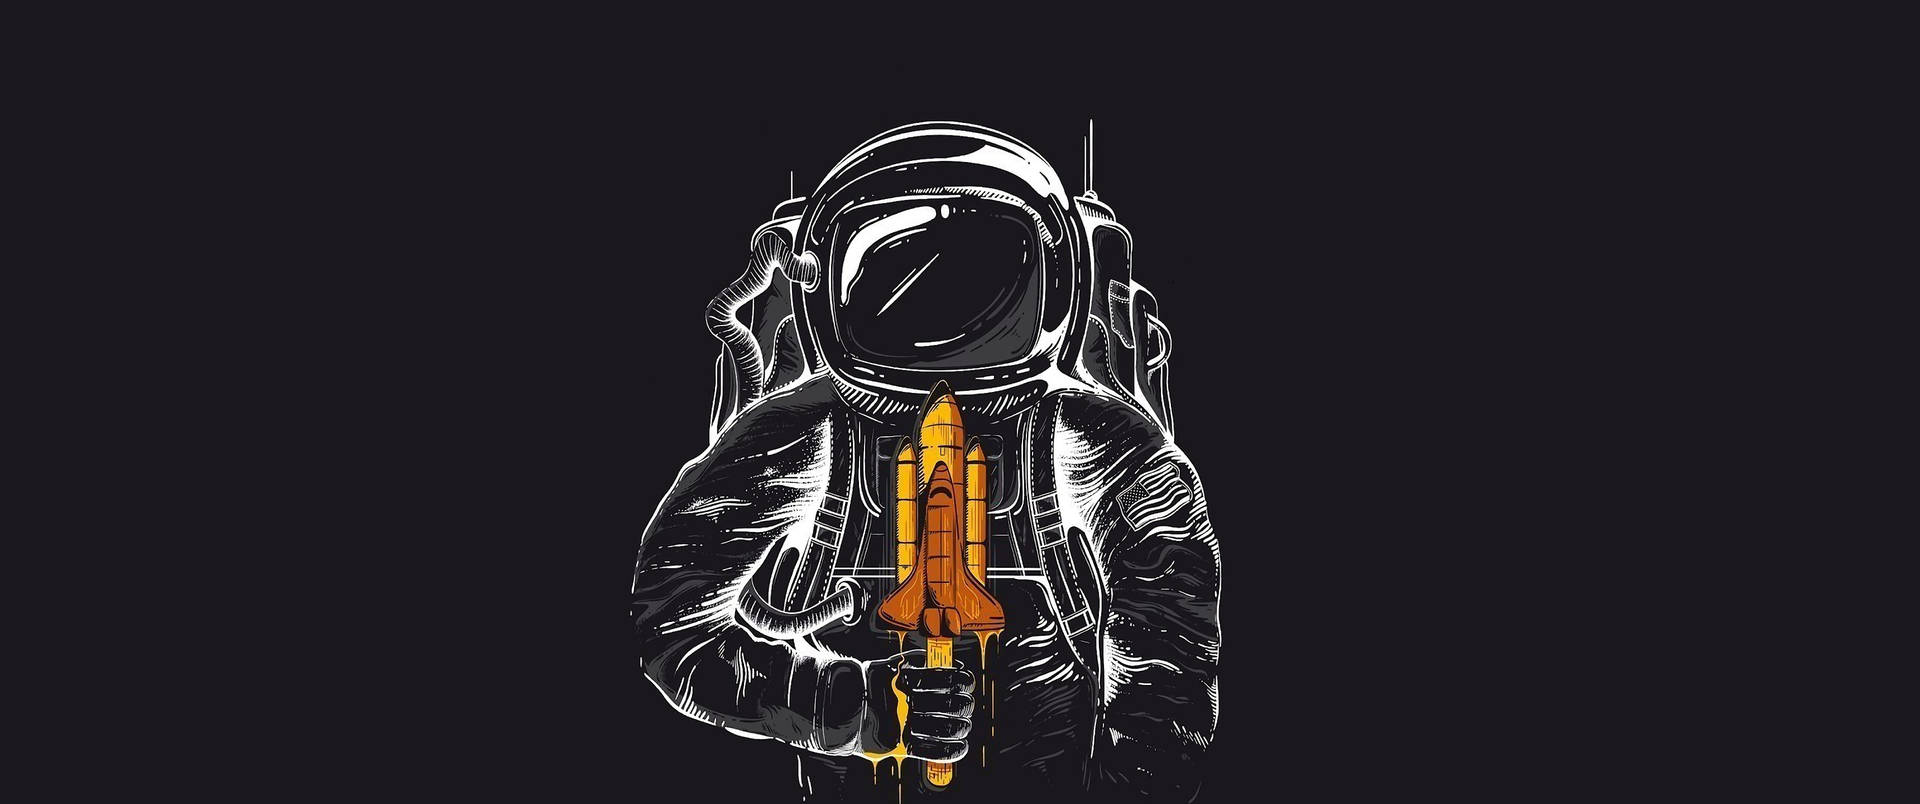 3440X1440 Space Aesthetic Wallpaper and Background